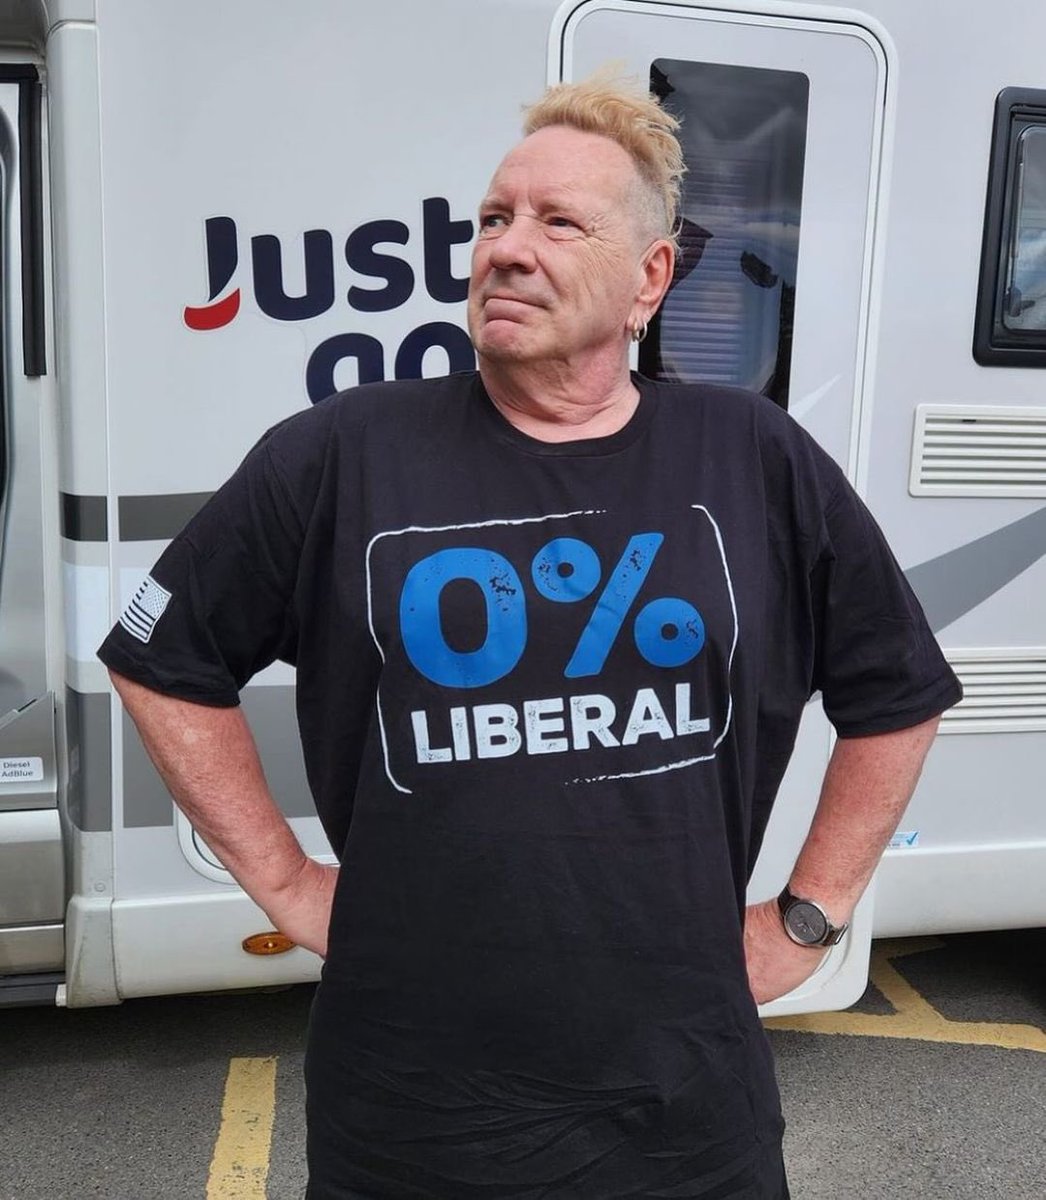 Liberal heads are EXPLODING over this!

John has been shocking and triggering people since the 70's. 

He does not give a FUCK who hates him. 

And that is why he is the best!

Only Liberal pieces of SHIT hate him!

#JohnLydon
#JohnnyRotten
#PublicImageLtd
#SexPistols
#Punk